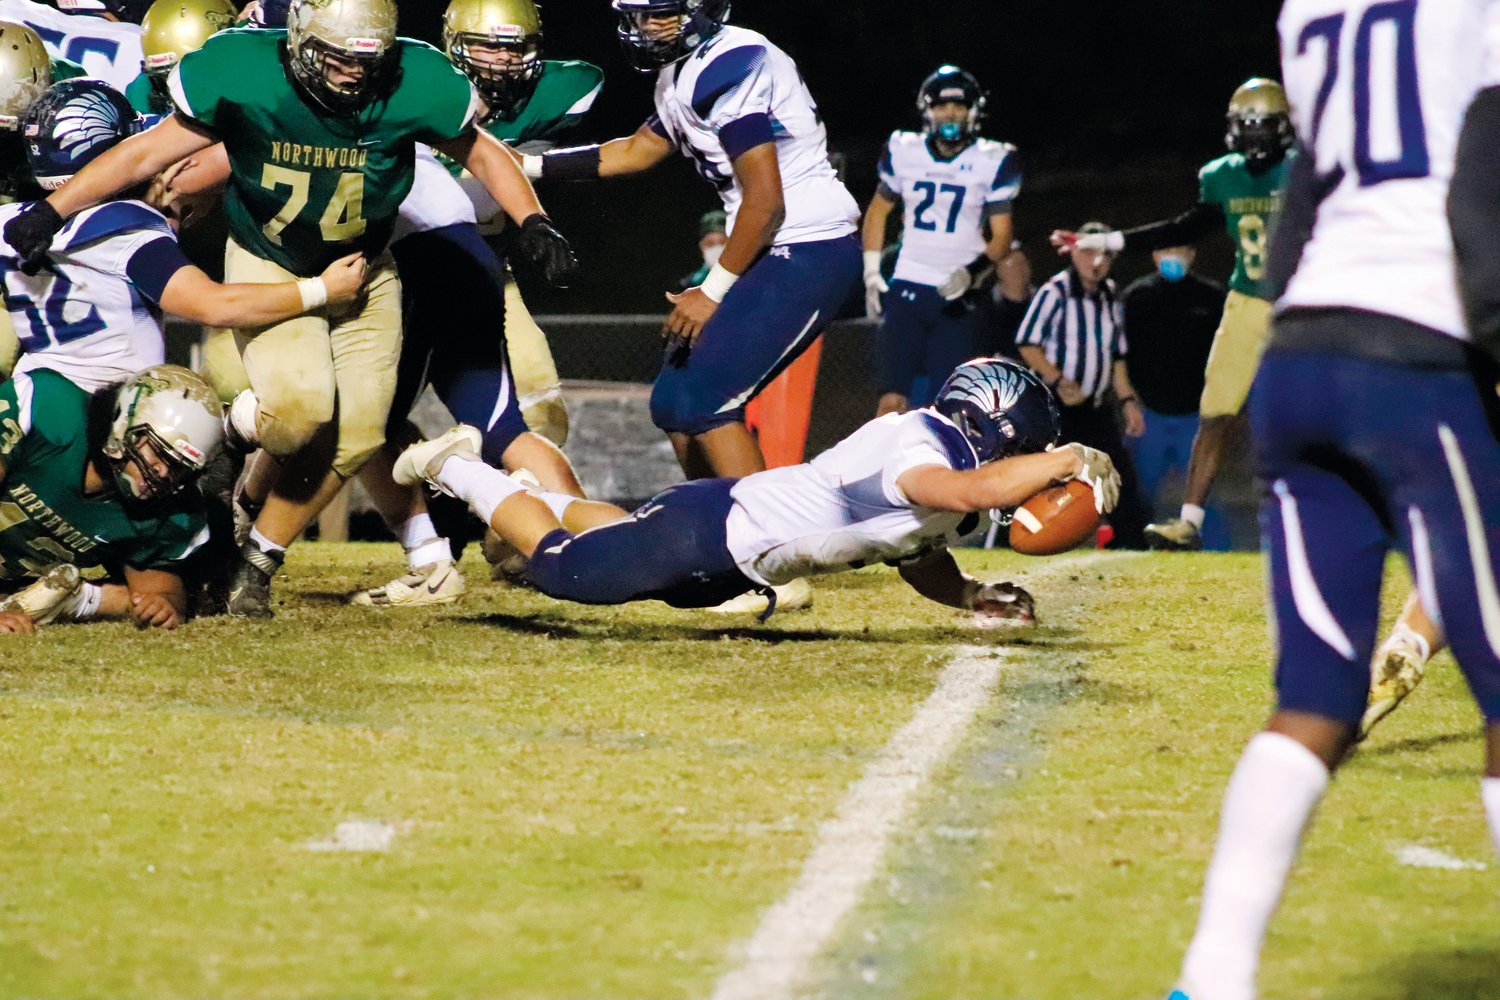 Western Alamance junior running back Mason Hogsed dives into the end zone for a 1-yard TD run in the second quarter of the Chargers' 21-6 loss to the Warriors last Friday. The touchdown came almost immediately after a muffed kickoff return by Northwood.